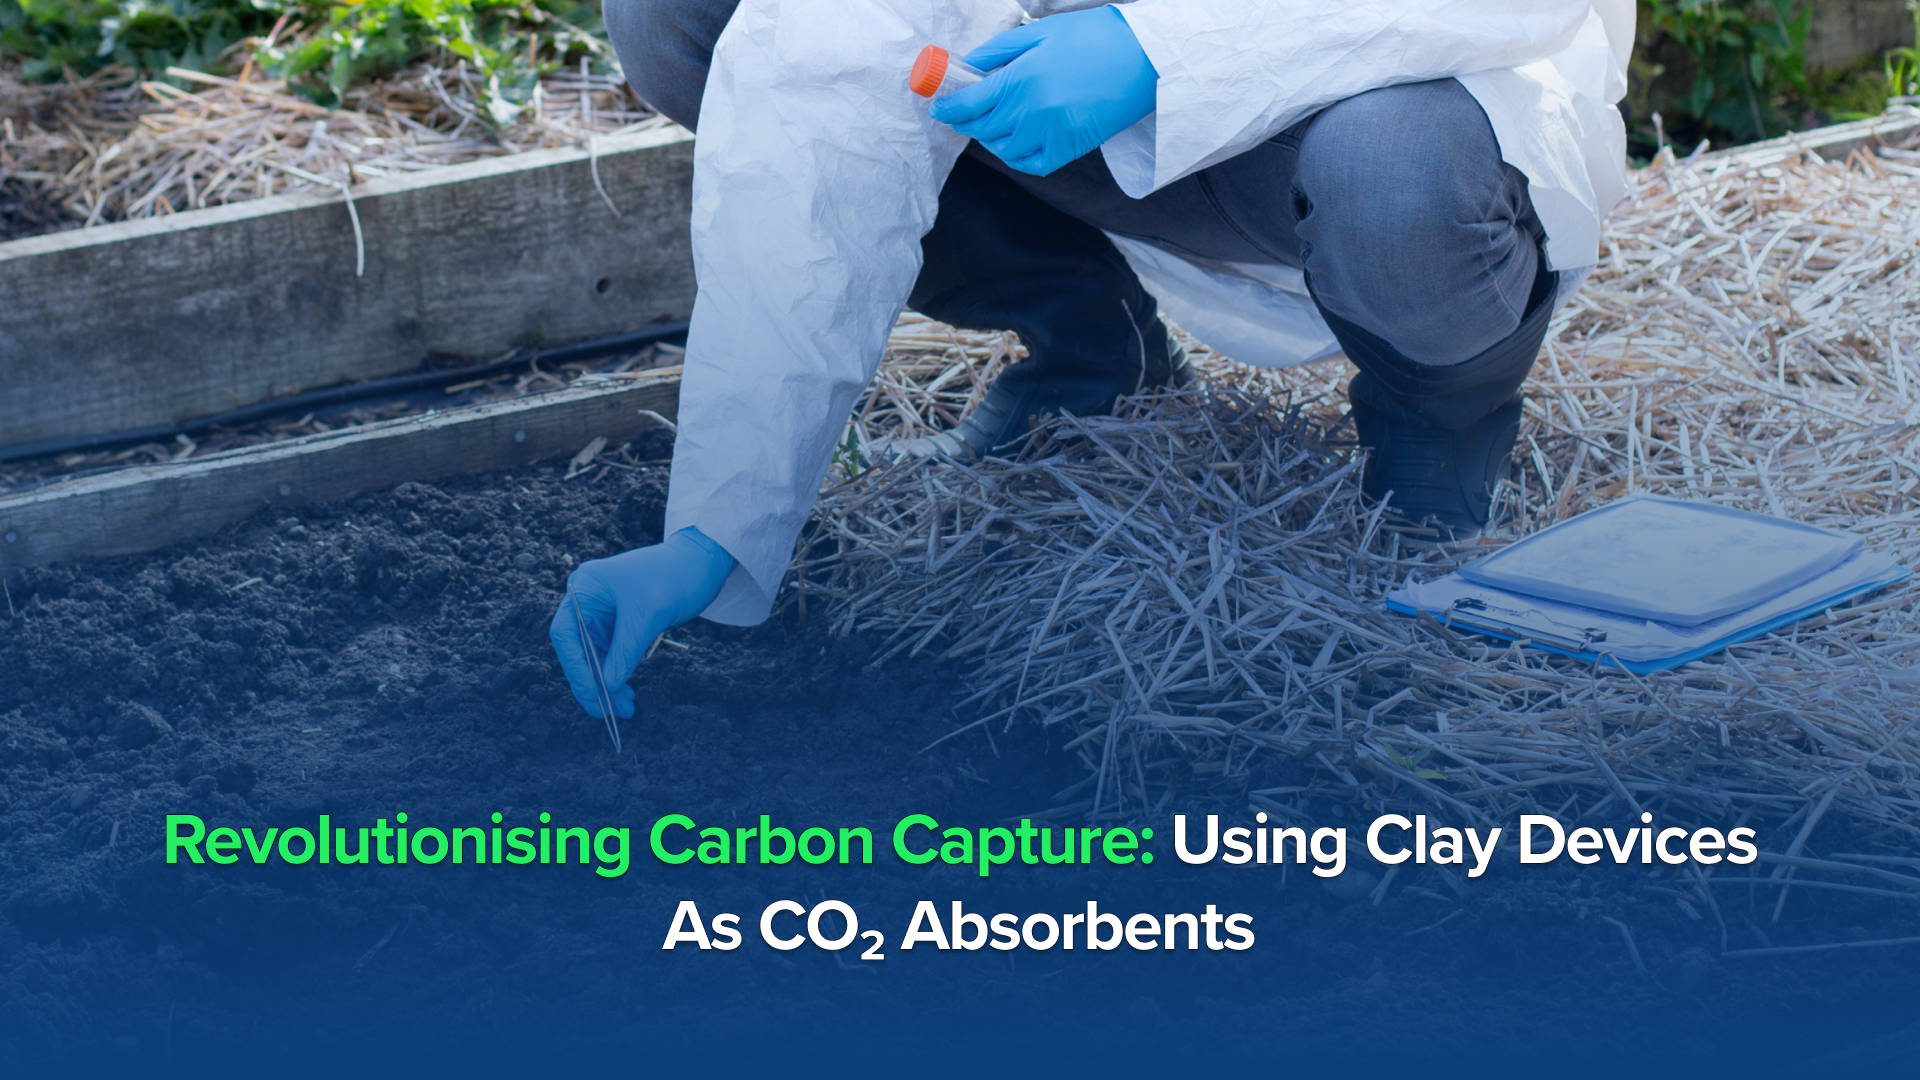 Revolutionising Carbon Capture: Using Clay Devices as CO₂ Absorbents